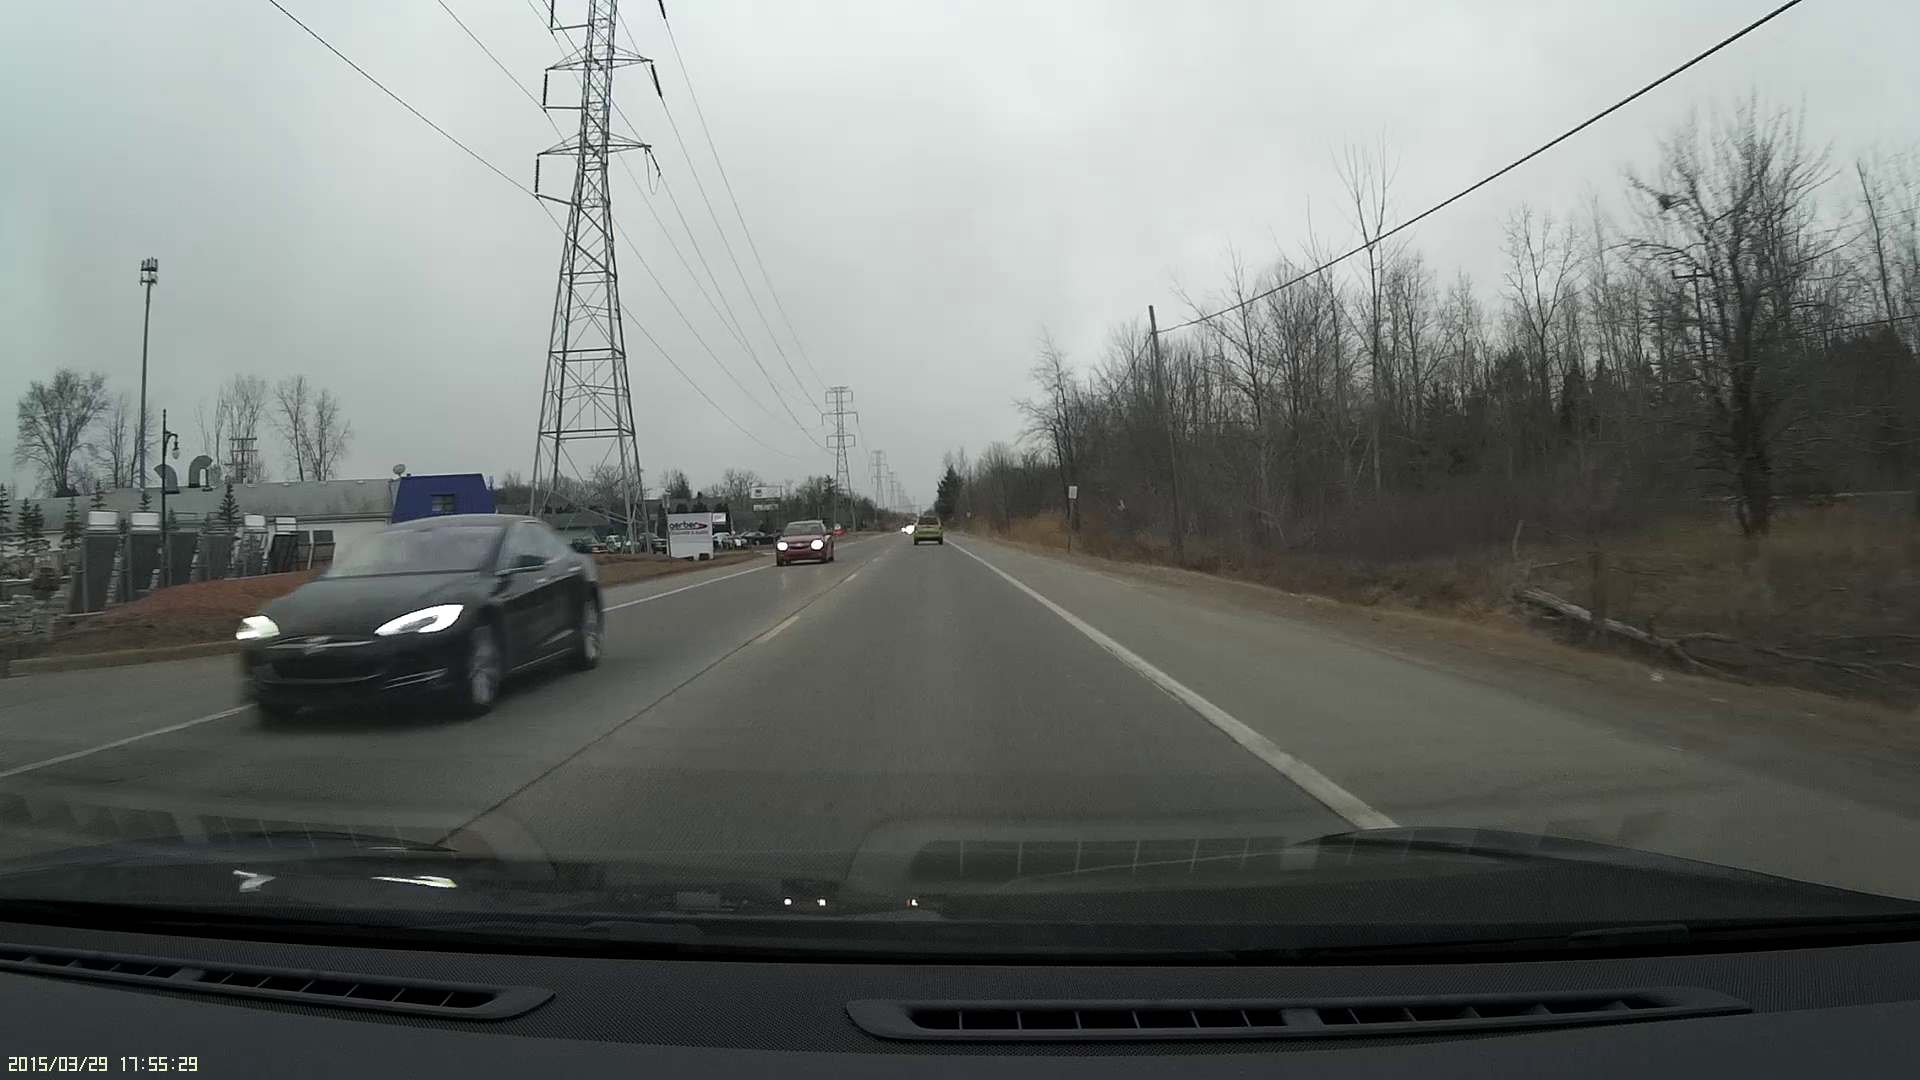 2015-03-29_model-s-sighting.png